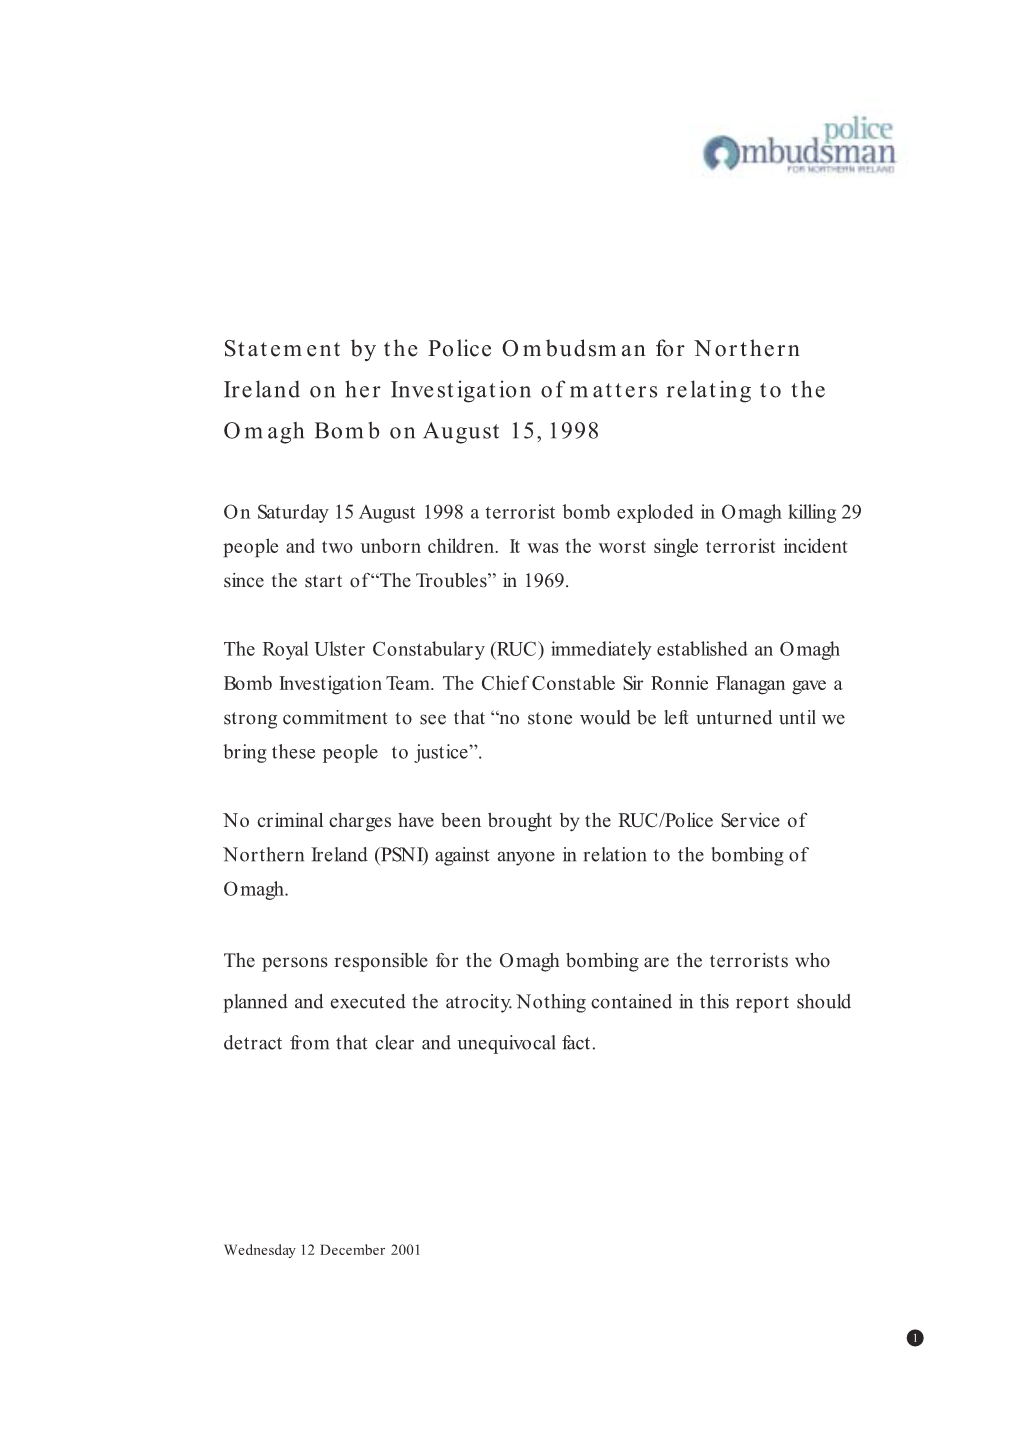 Statement by the Police Ombudsman for Northern Ireland on Her Investigation of Matters Relating to the Omagh Bomb on August 15, 1998